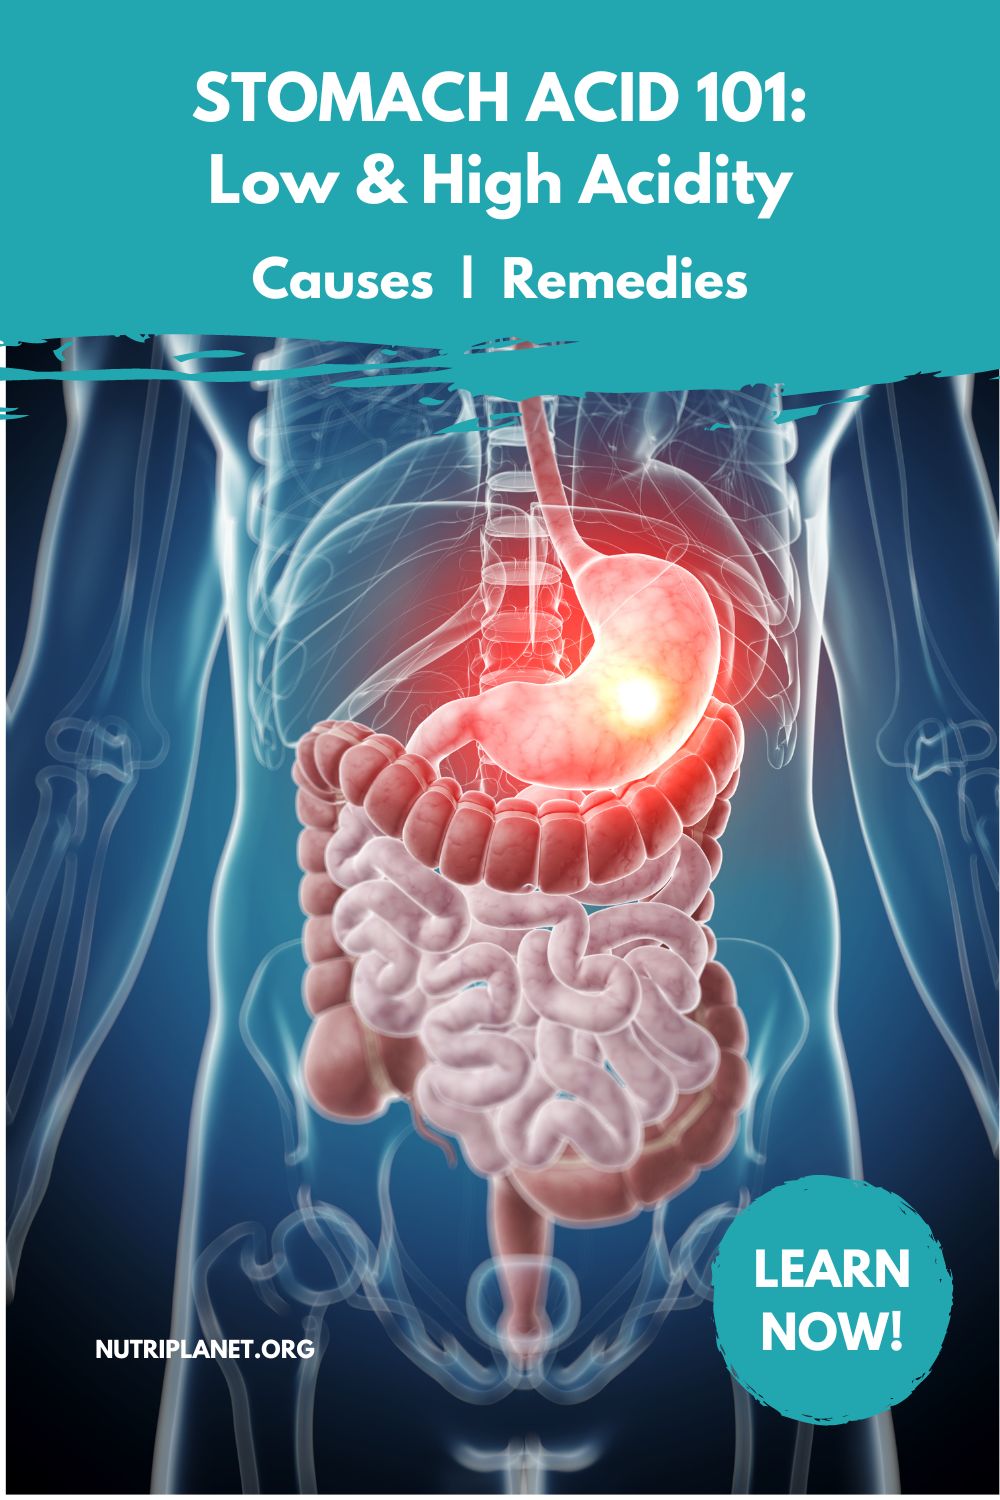 The importance of stomach acid, symptoms and causes of low and high stomach acid. Remedies for low and high acidity. 